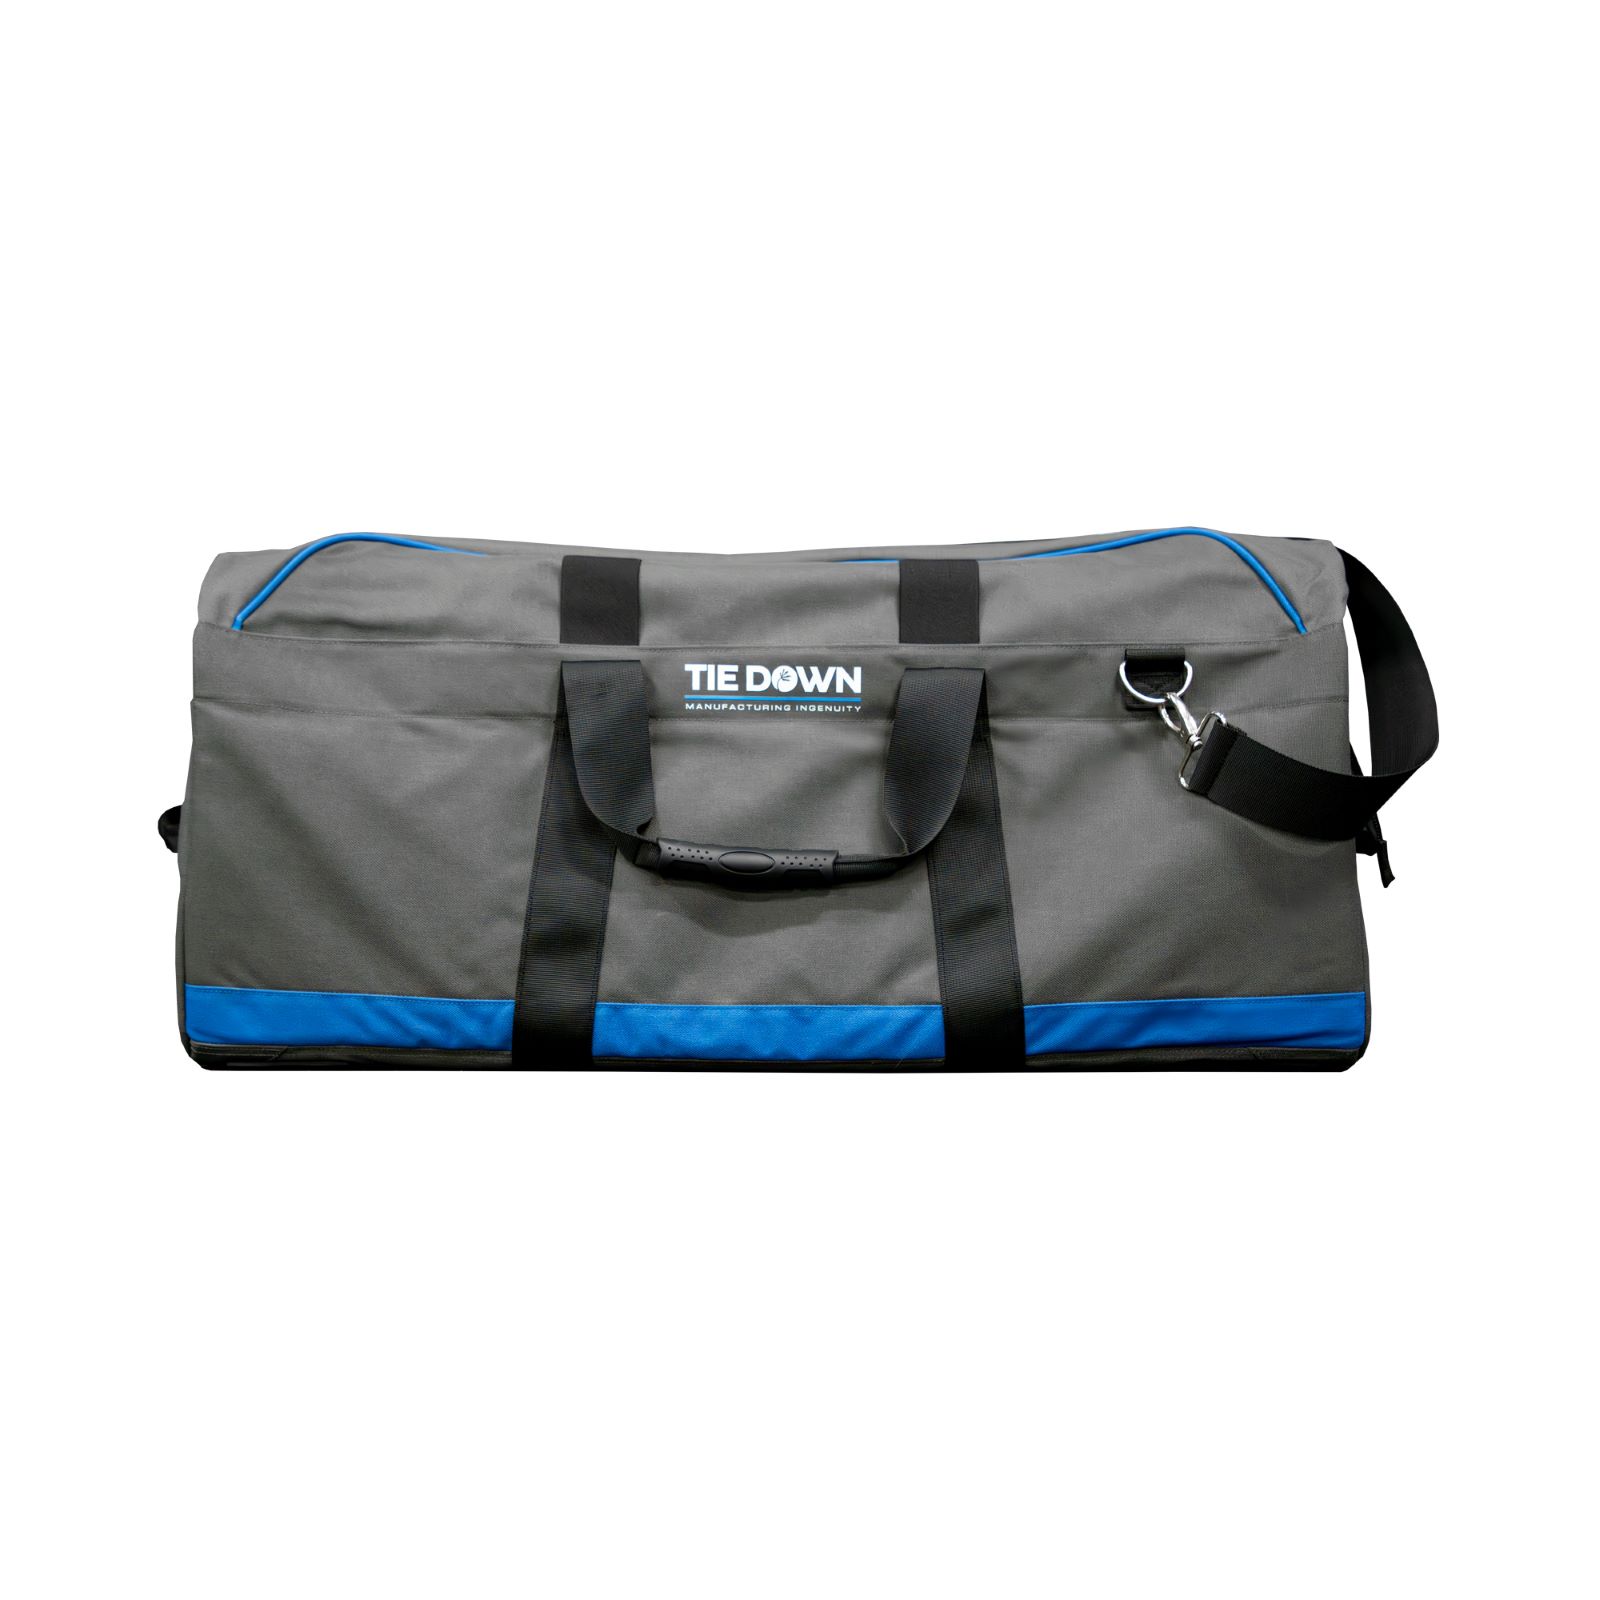 Tie Down Safety Utility Bag